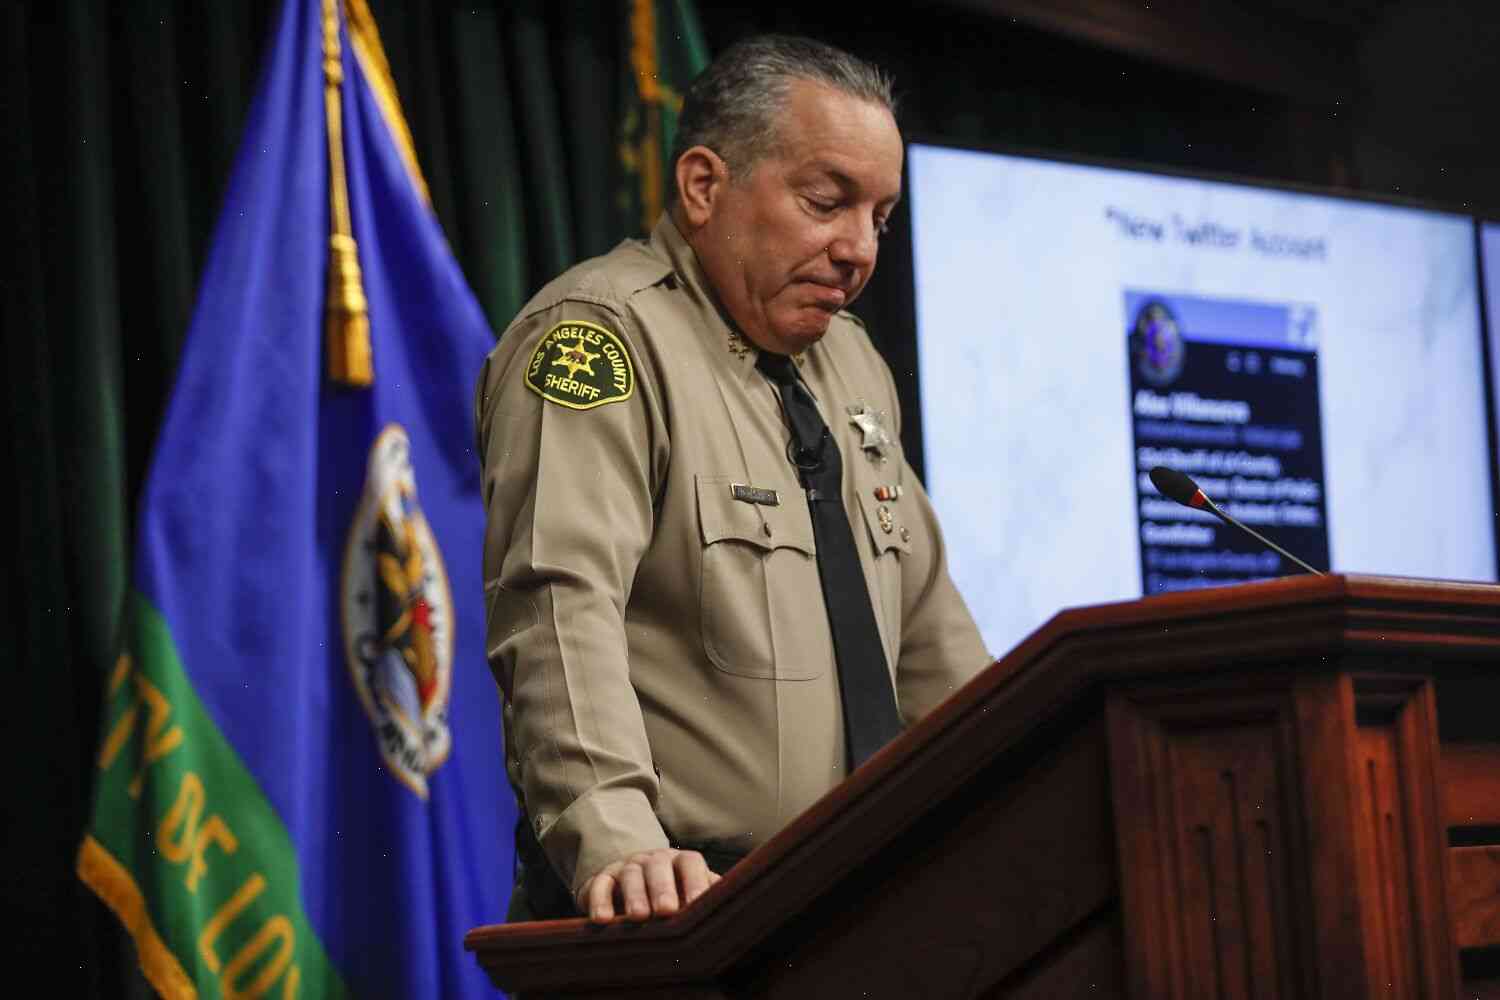 The Sheriff's Department Is Not in the Best Position to Succeed Under Any Pressure